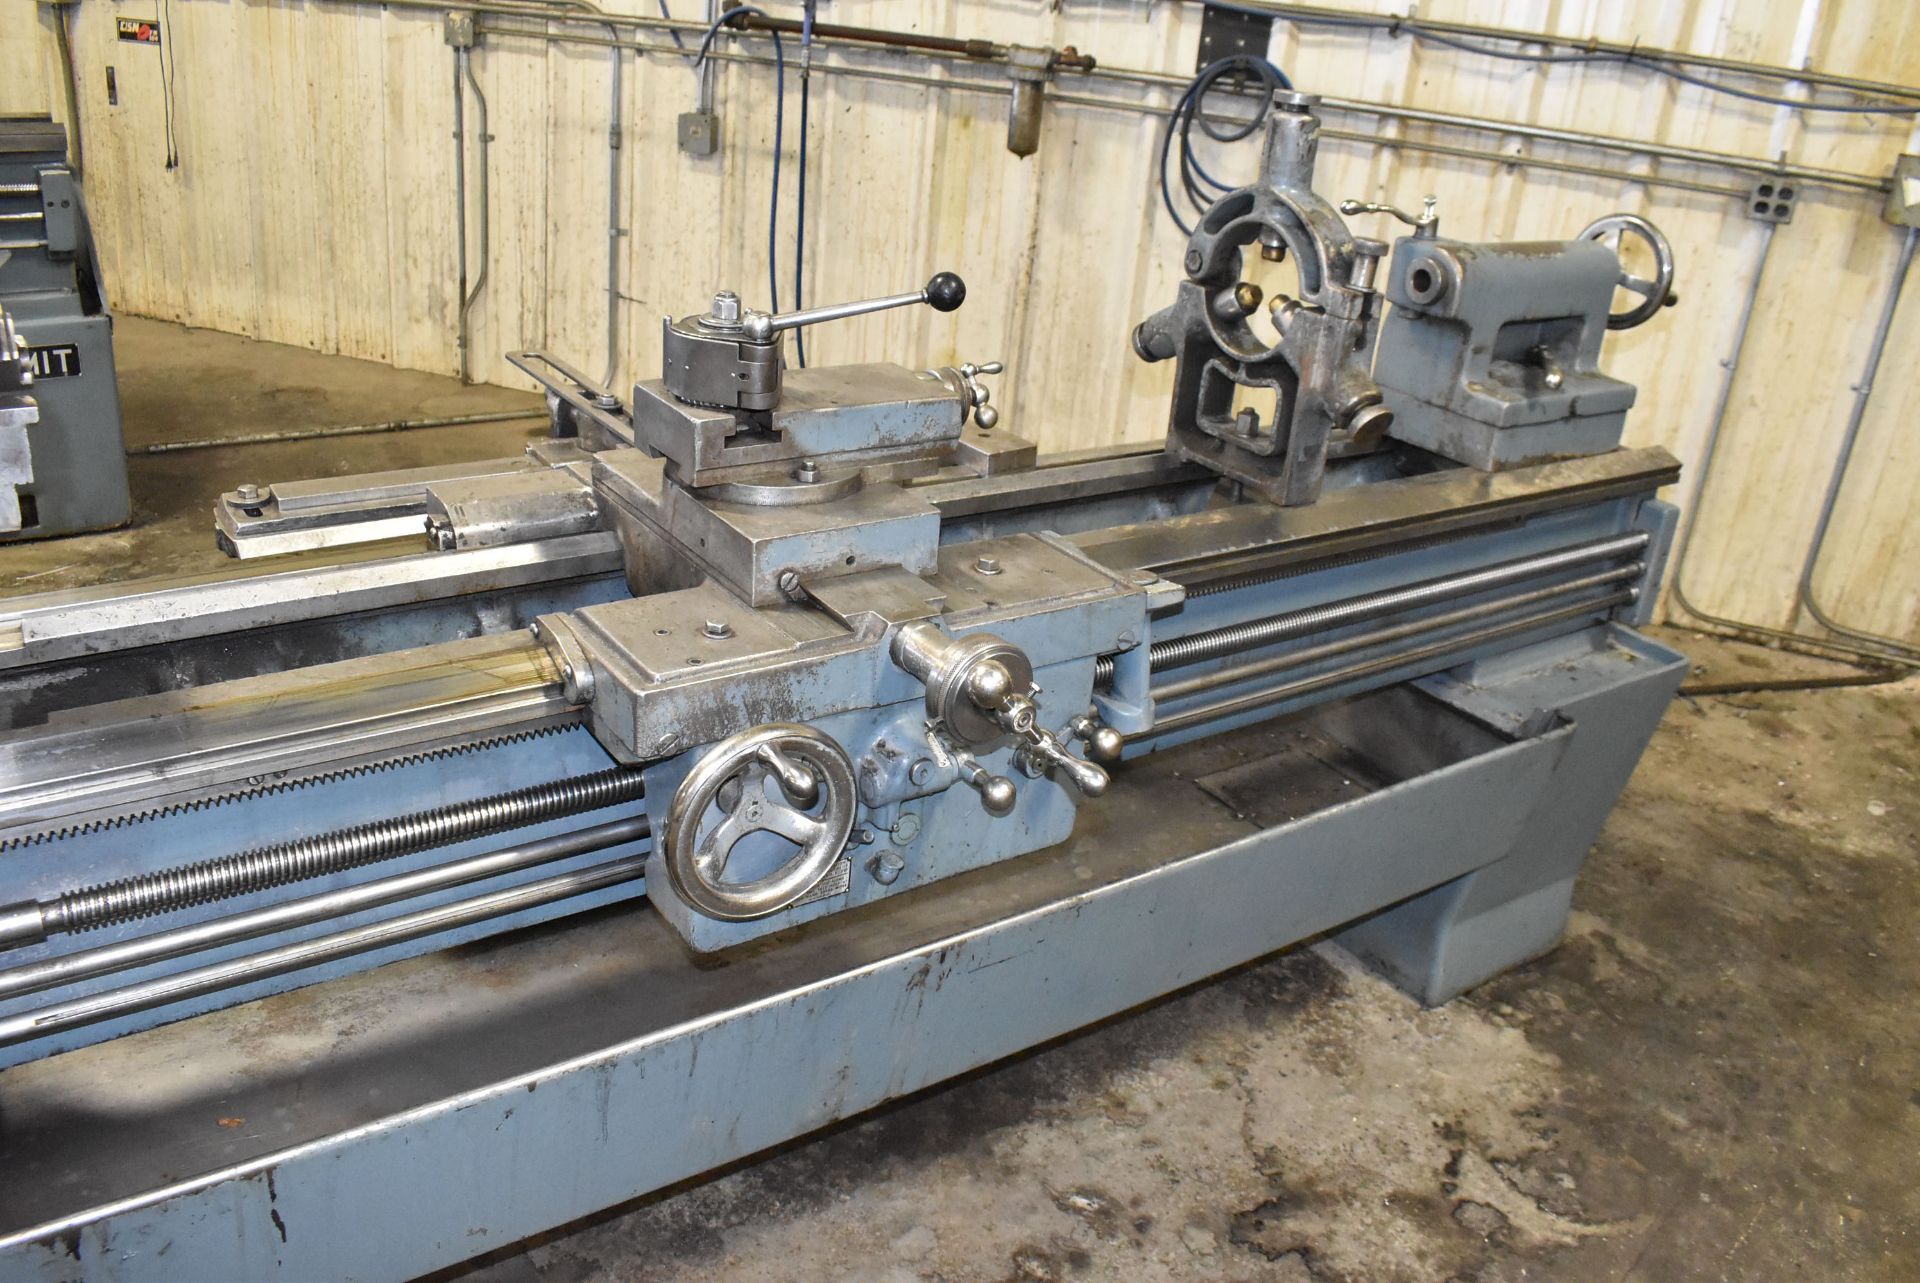 WILLIAM & WILSON LEBLOND REGAL LATHE WITH 22" SWING OVER BED, 67.5" BETWEEN CENTERS, 1.25" BORE, - Image 5 of 10